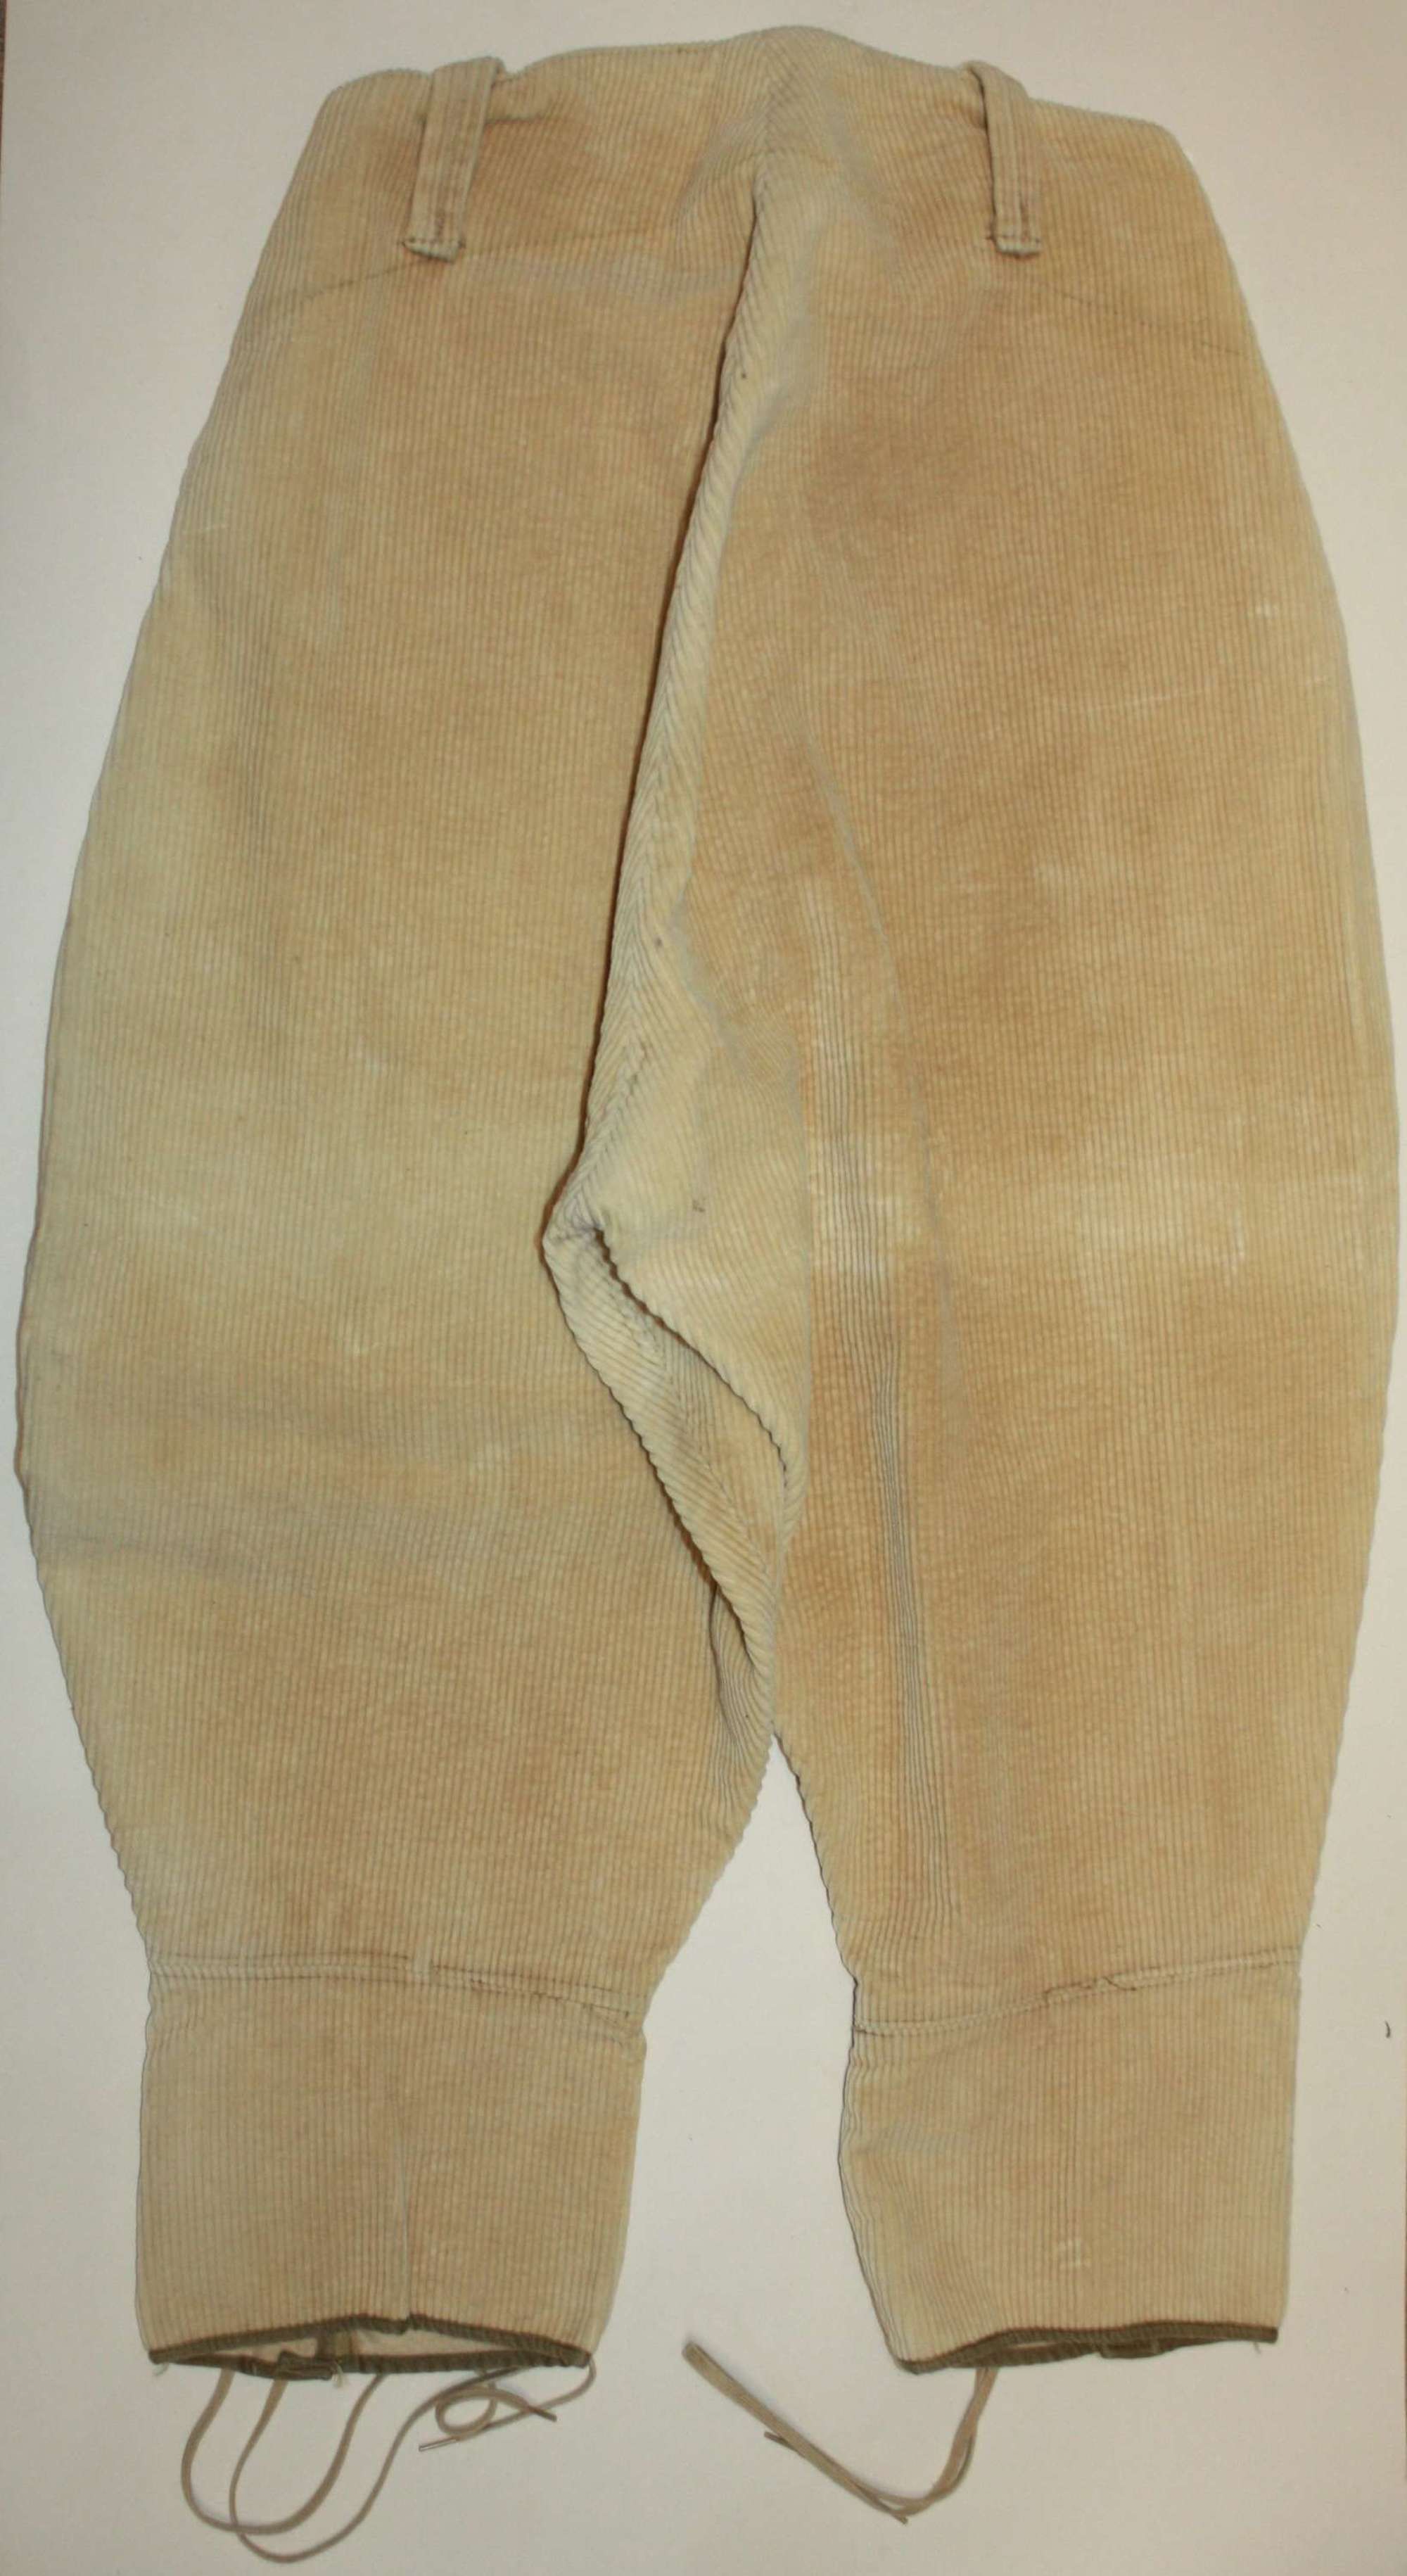 A GOOD SMALL SIZE PAIR OF WOMENS LAND ARMY TROUSERS SIZE 1 WWII DATED